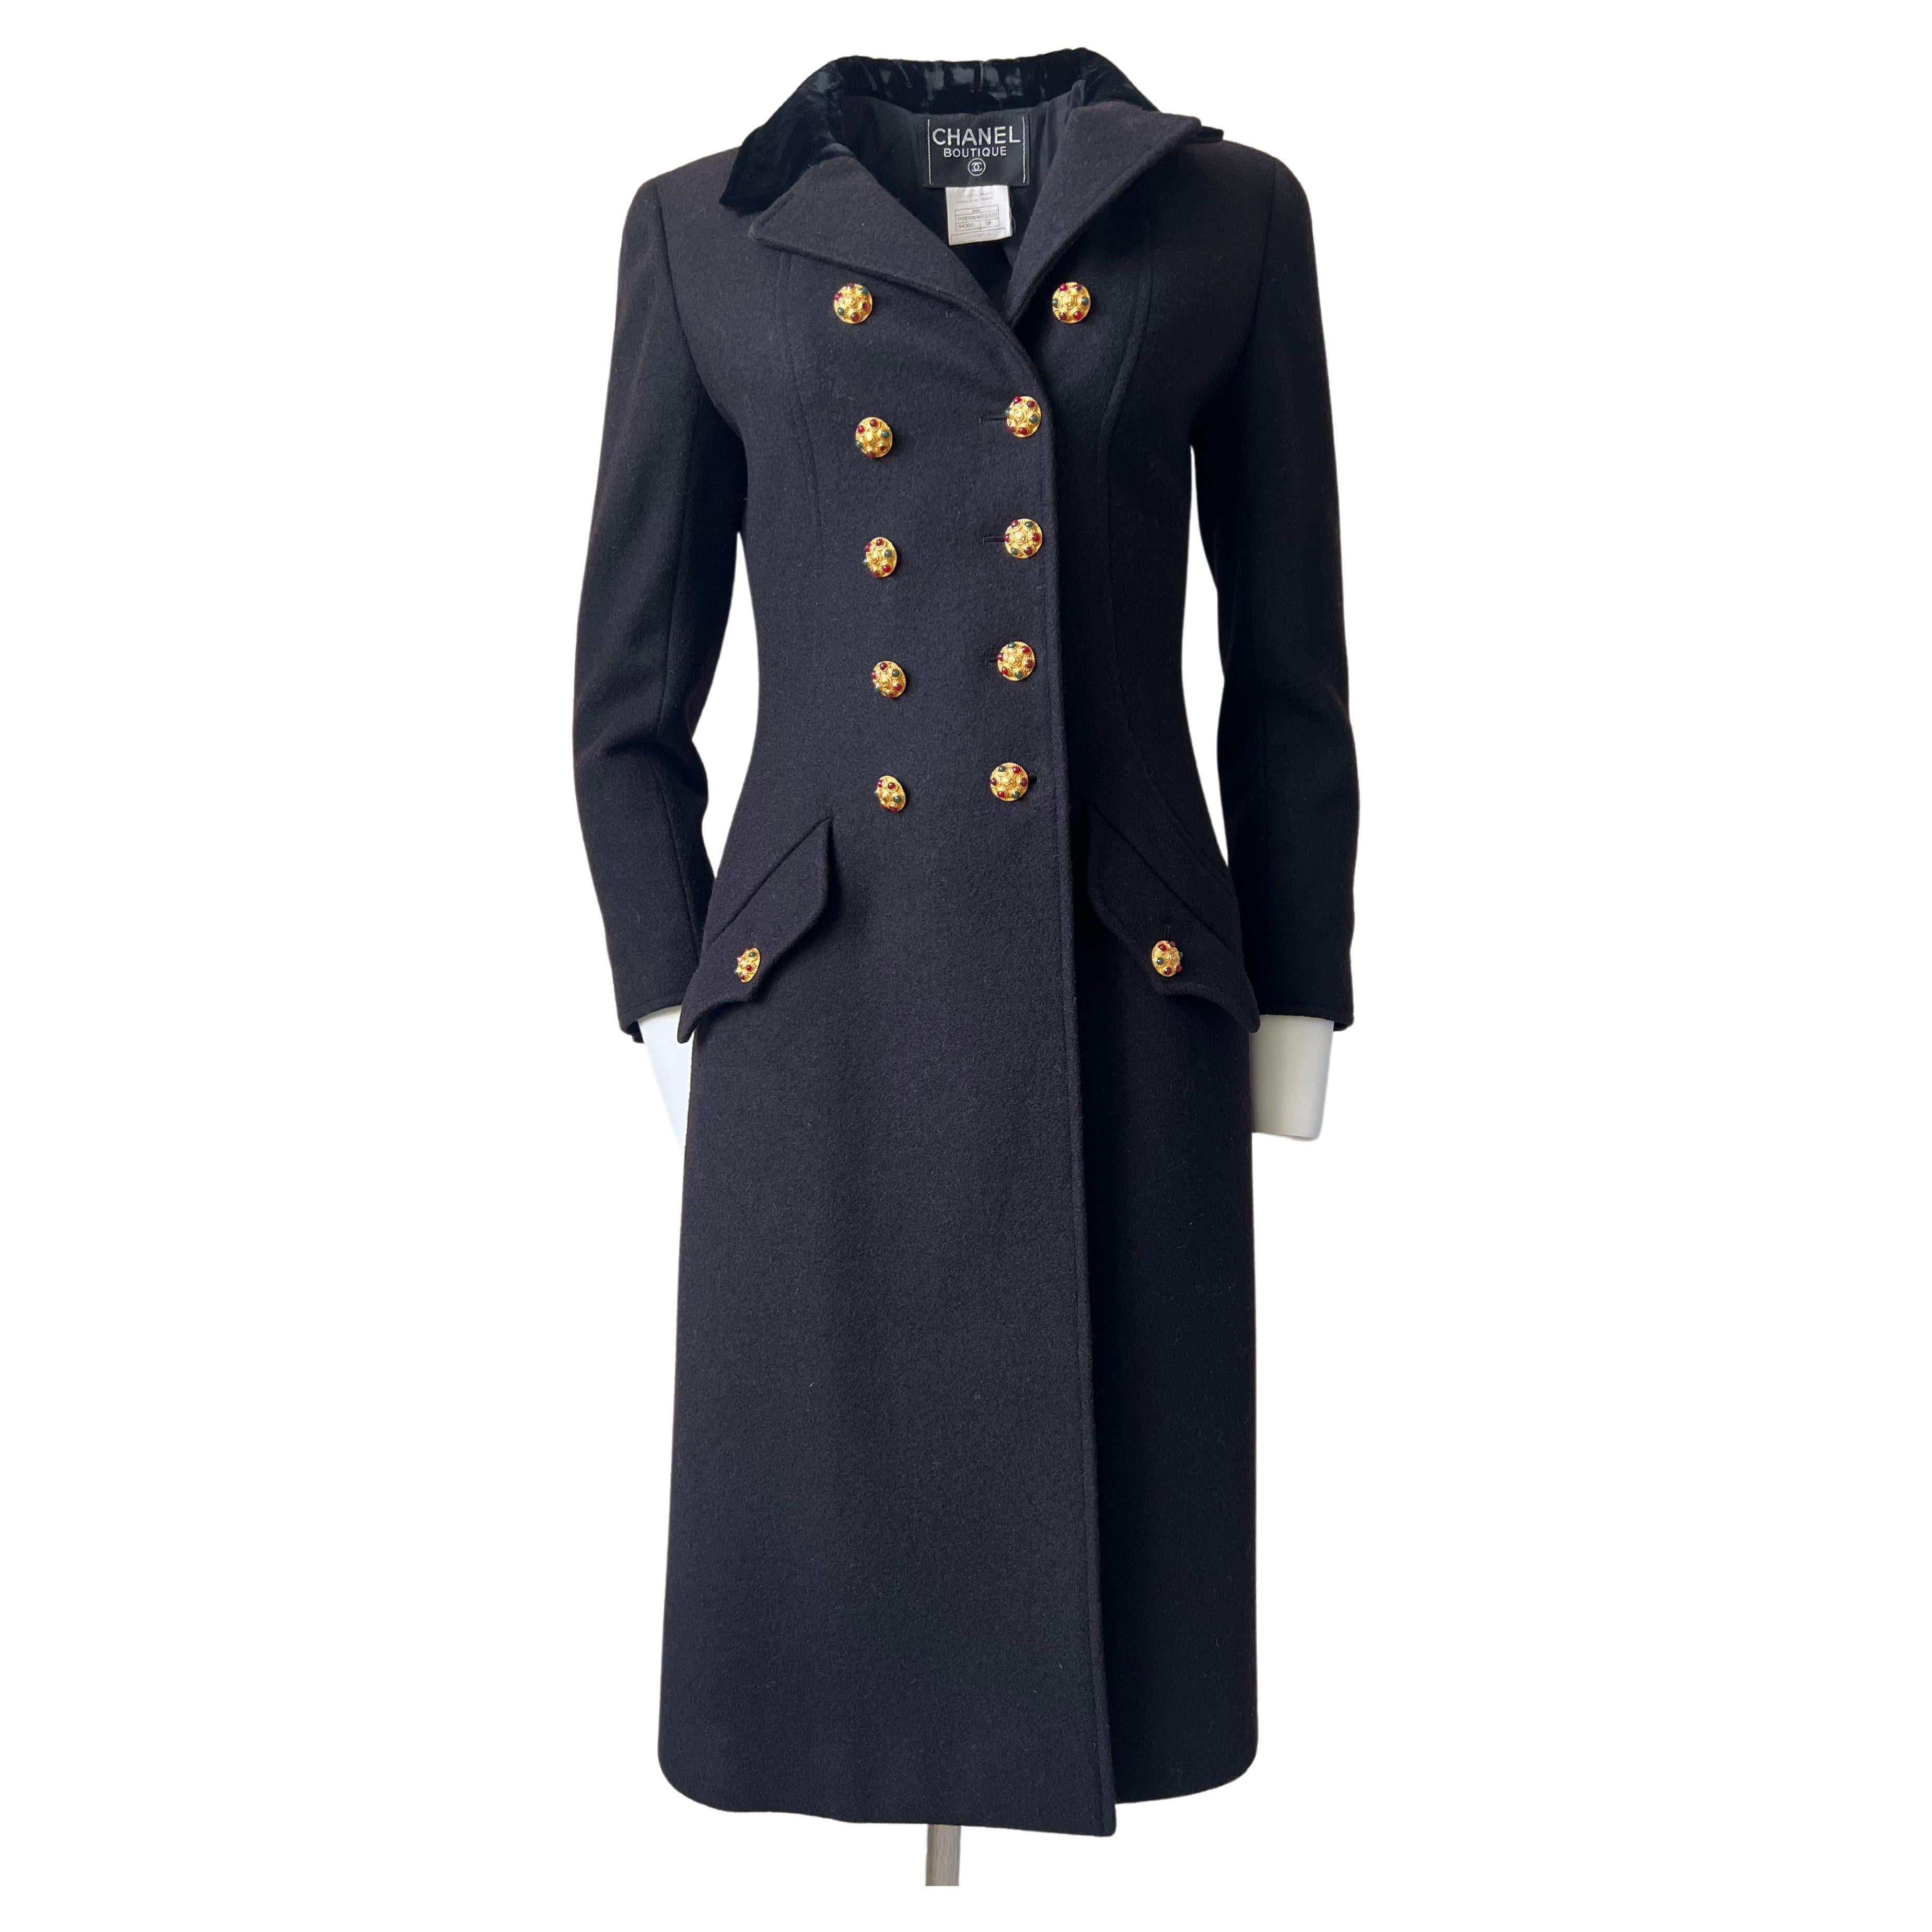 Chanel Gripoix Coat - 9 For Sale on 1stDibs